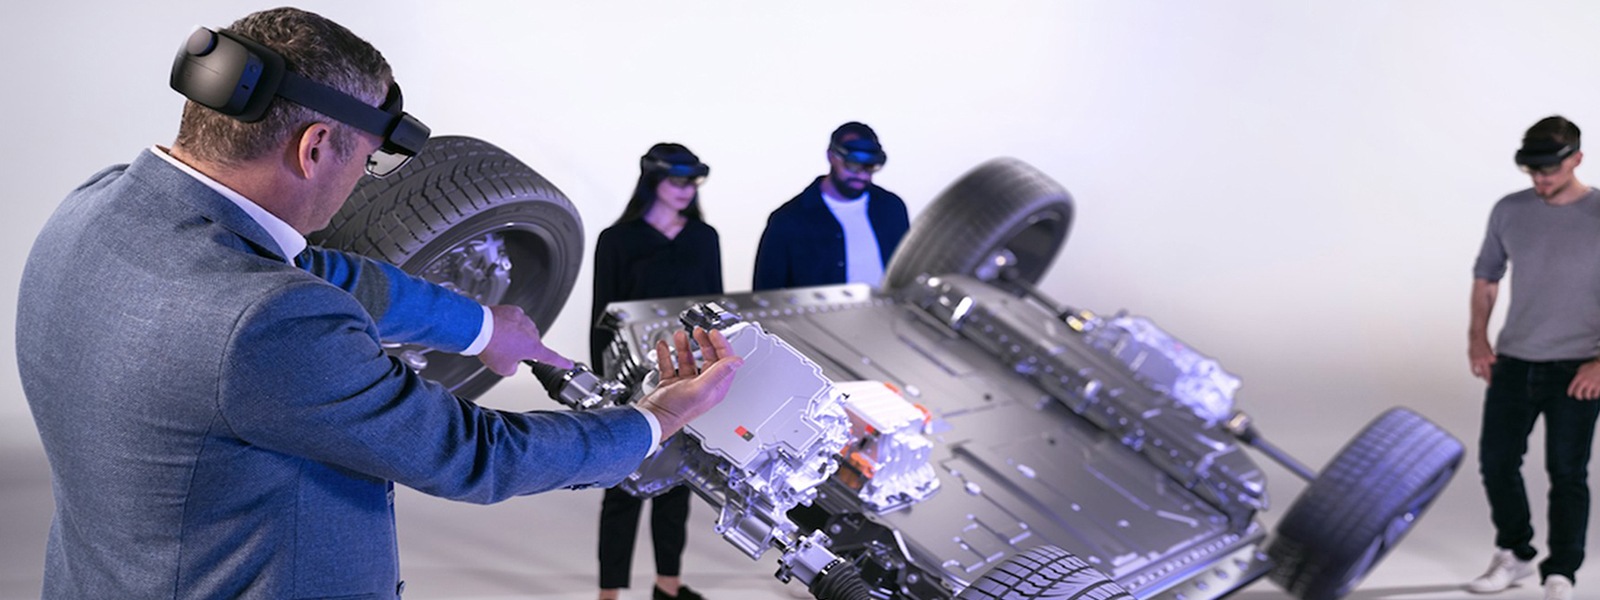 Four people using HoloLens 2 devices to view an AR model of the base of a car.